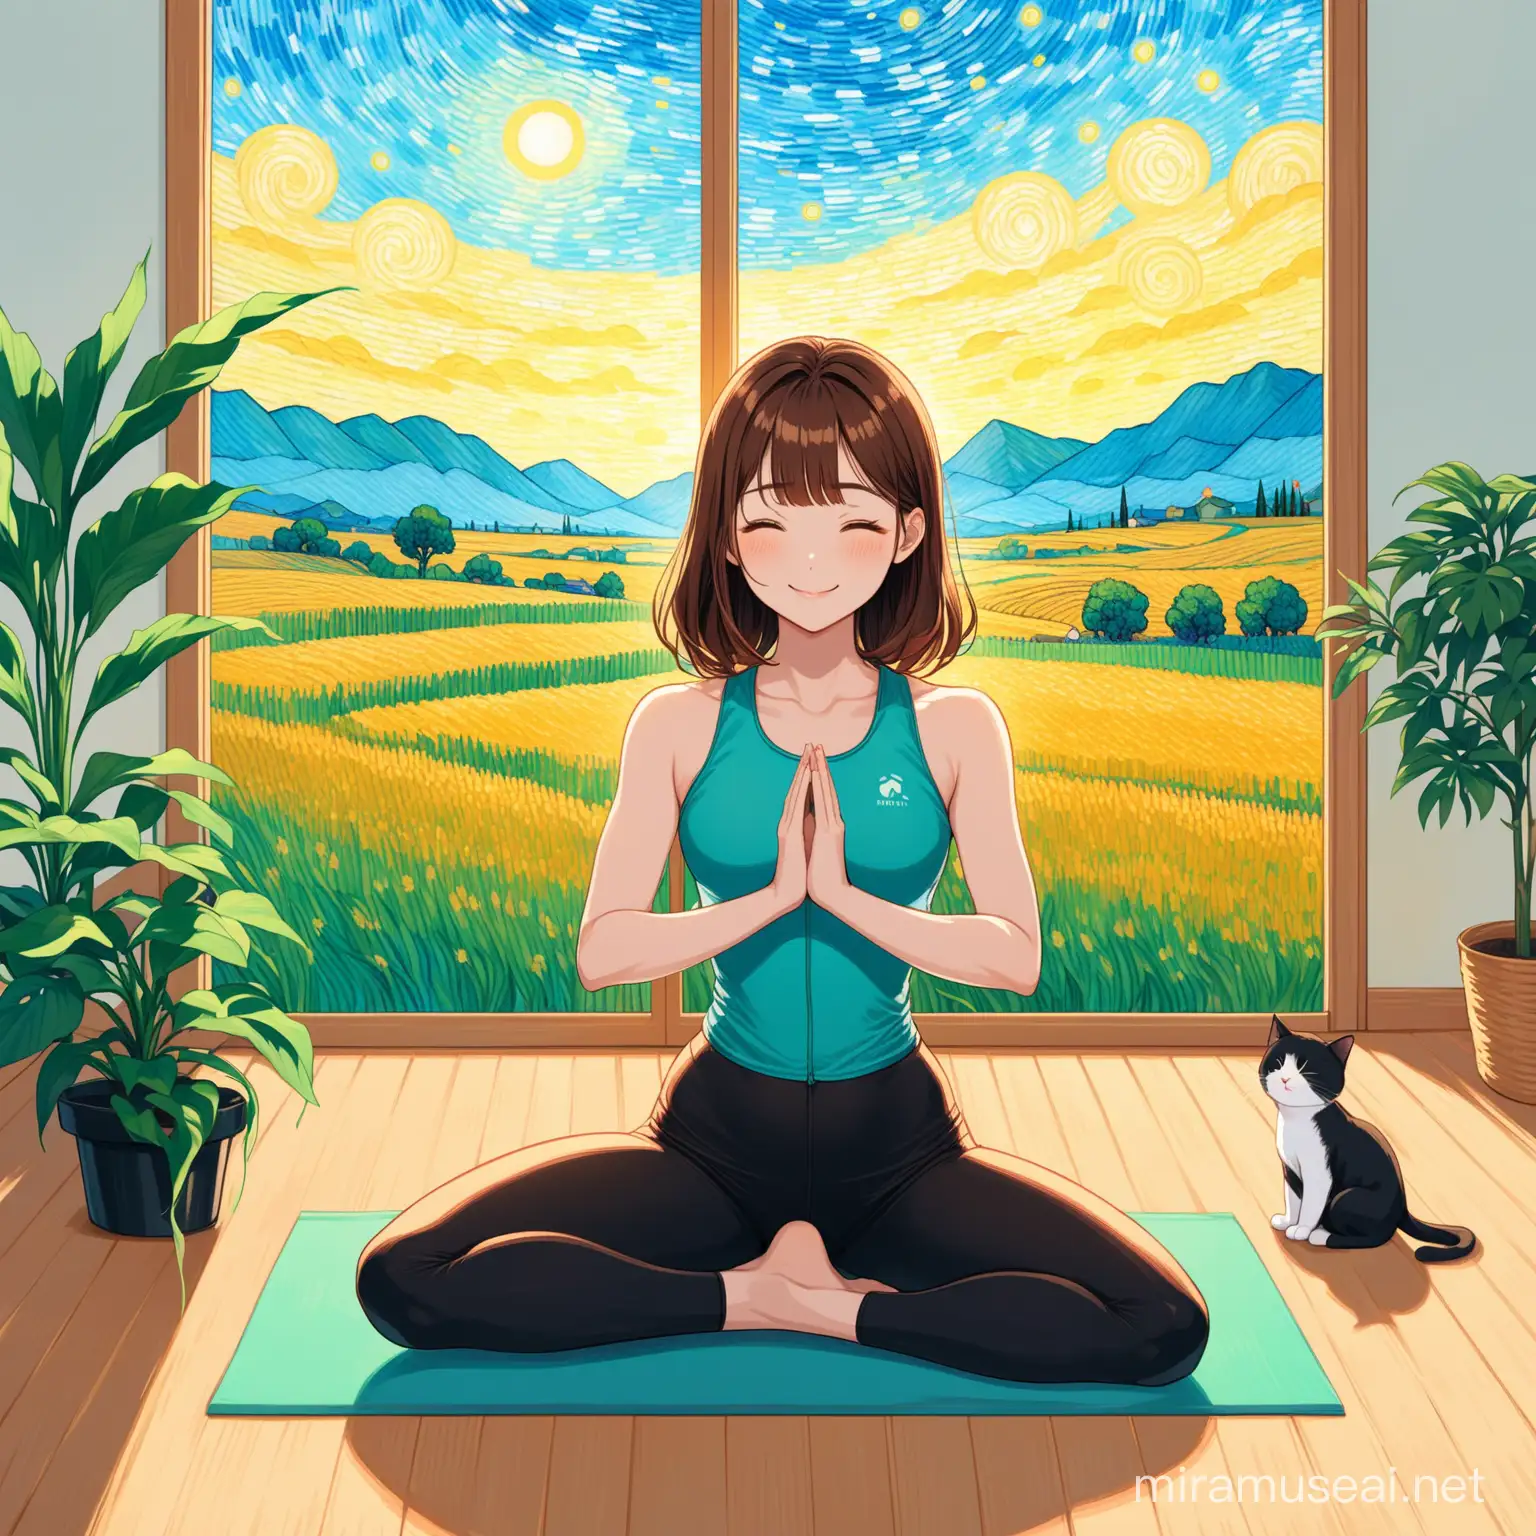 Drawing of one cute Asian young adult, brown hair, wearing fitness outfits, perfect body, she has refreshing innocent visual, she is doing a yoga pose, a cute cat beside her, the expression is smile, she is an INFJ so make sure able to express her peaceful attitude. The background is inside minimalistic room, make sure there is a fresh plant. Landscape. Best quality. The painting looks like created by Van Gogh style.
